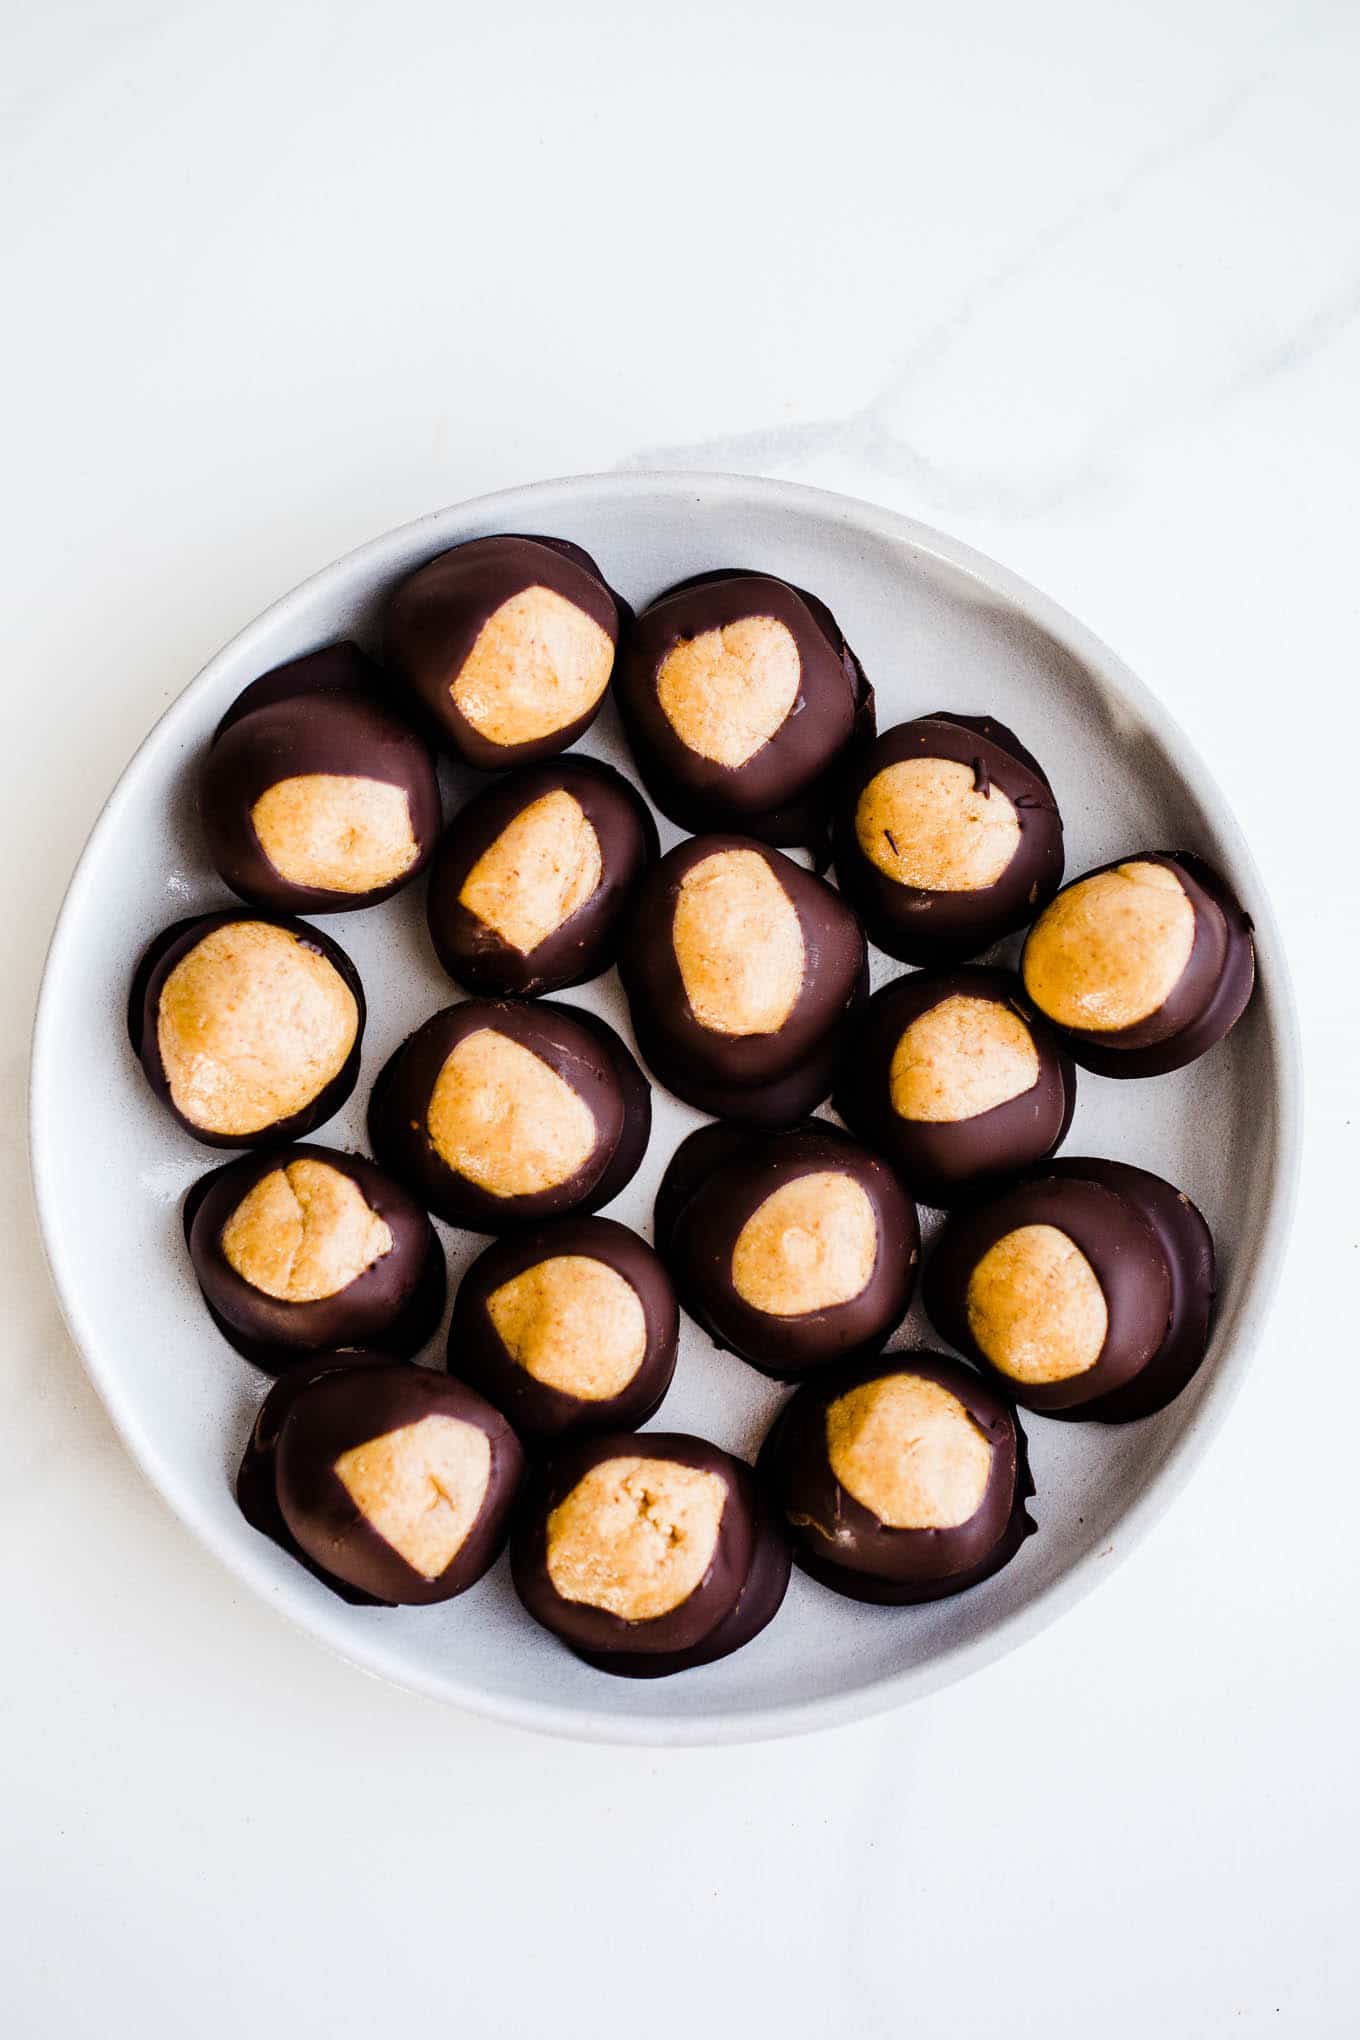 Peanut butter chocolate buckeyes on a white plate set on a marble surface.